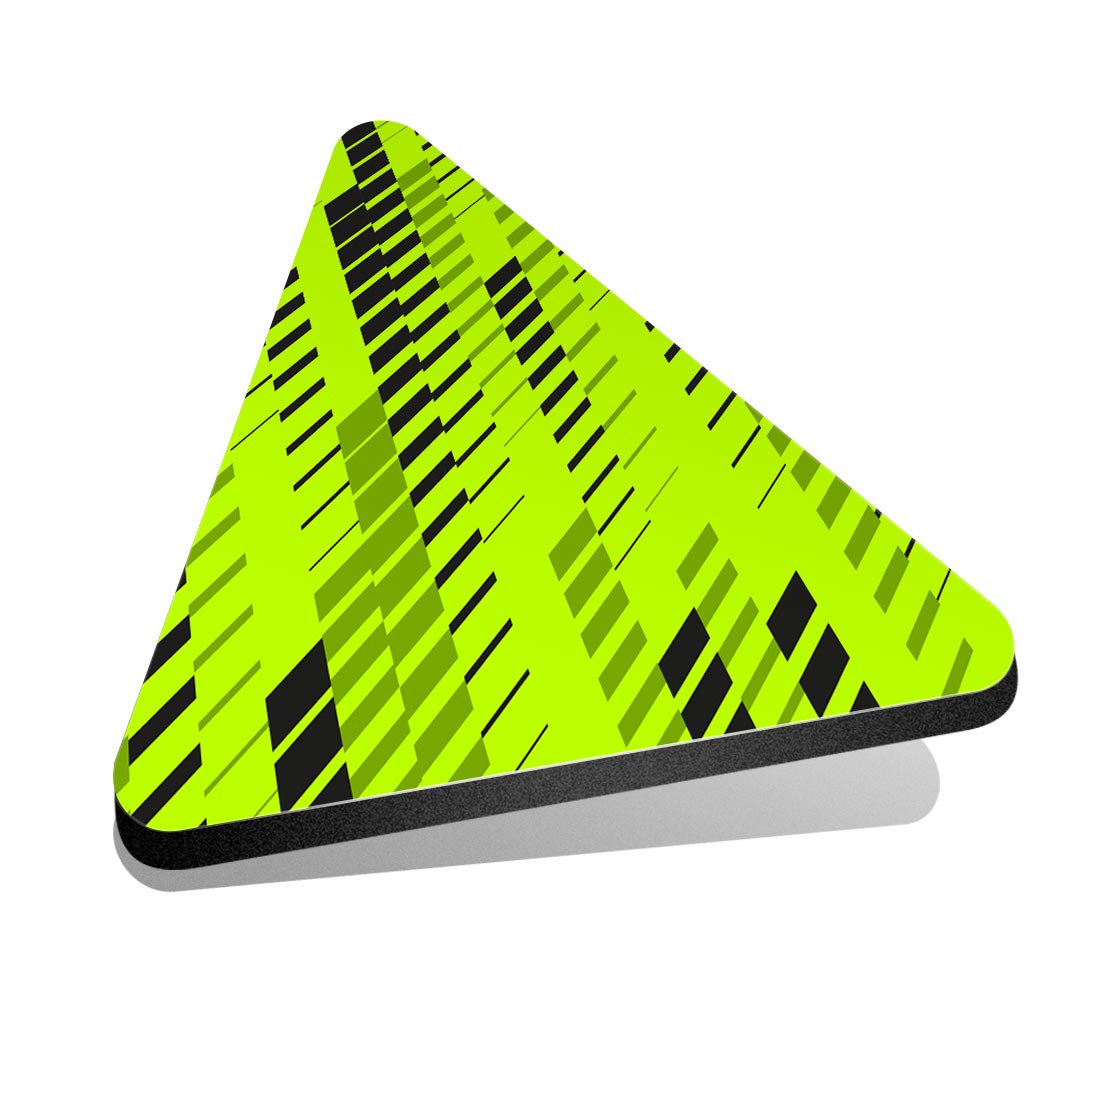 1x Triangle Fridge MDF Magnet Abstract Green Tech Pattern #50024 - Picture 1 of 1